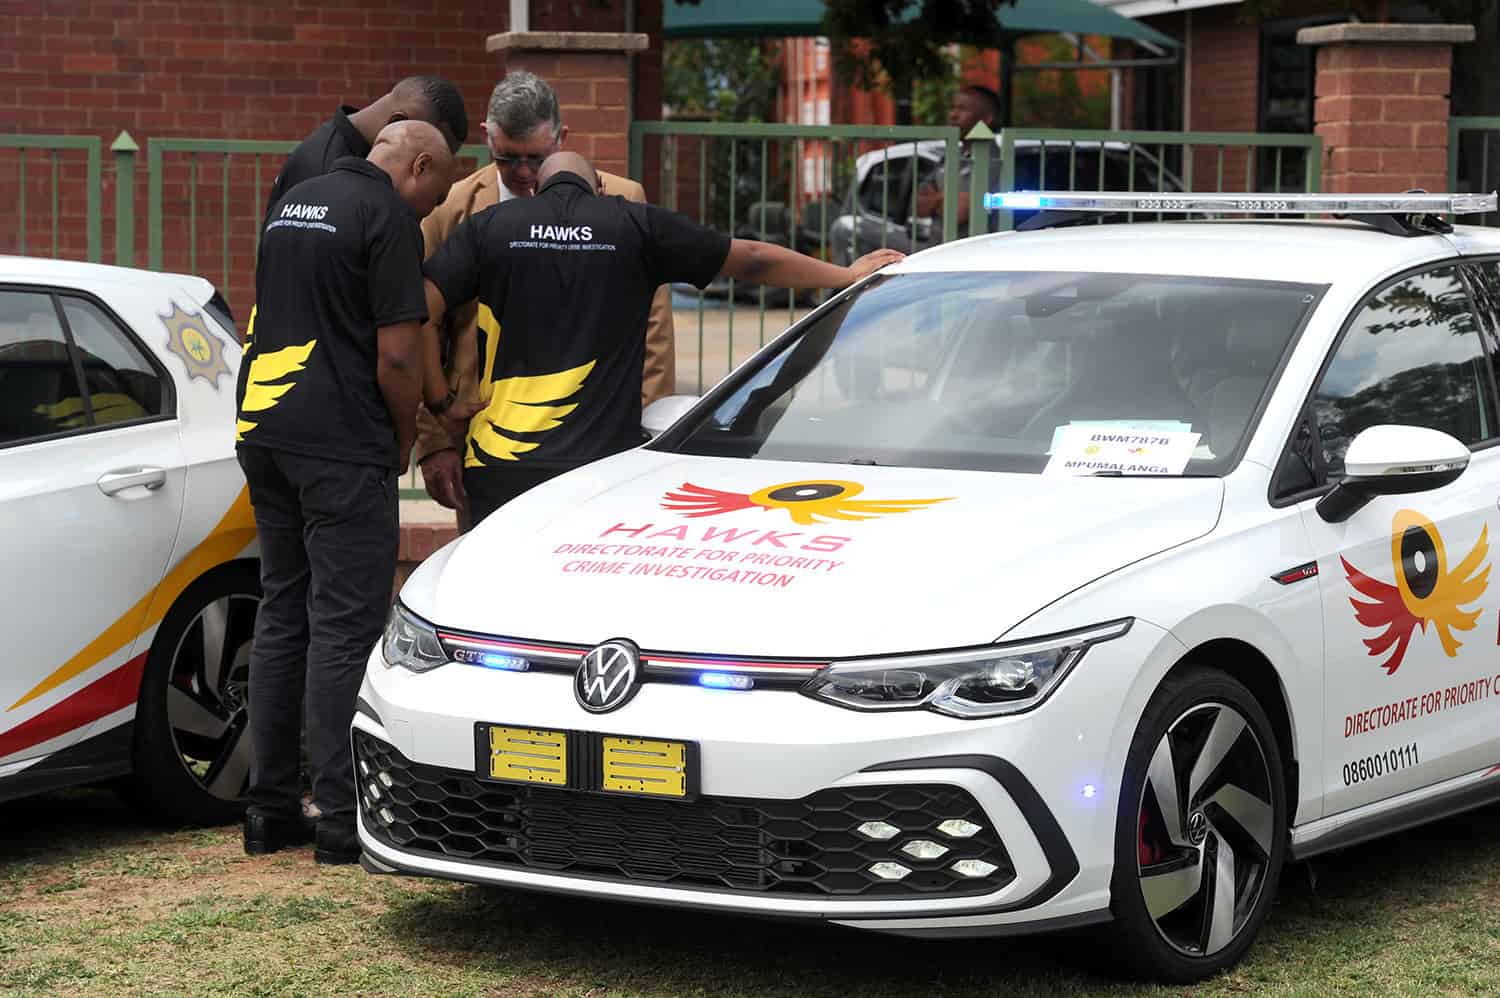 Hawks get 62 cars ‘to beef up rapid response’